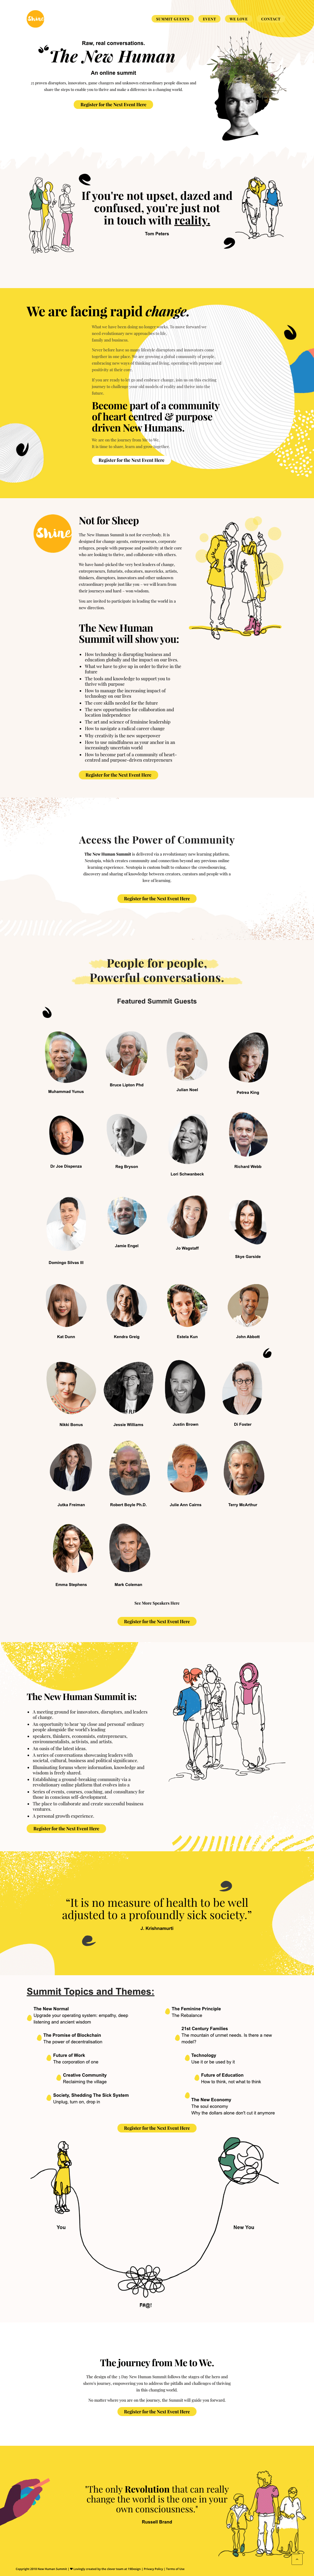 The New Human Summit home page